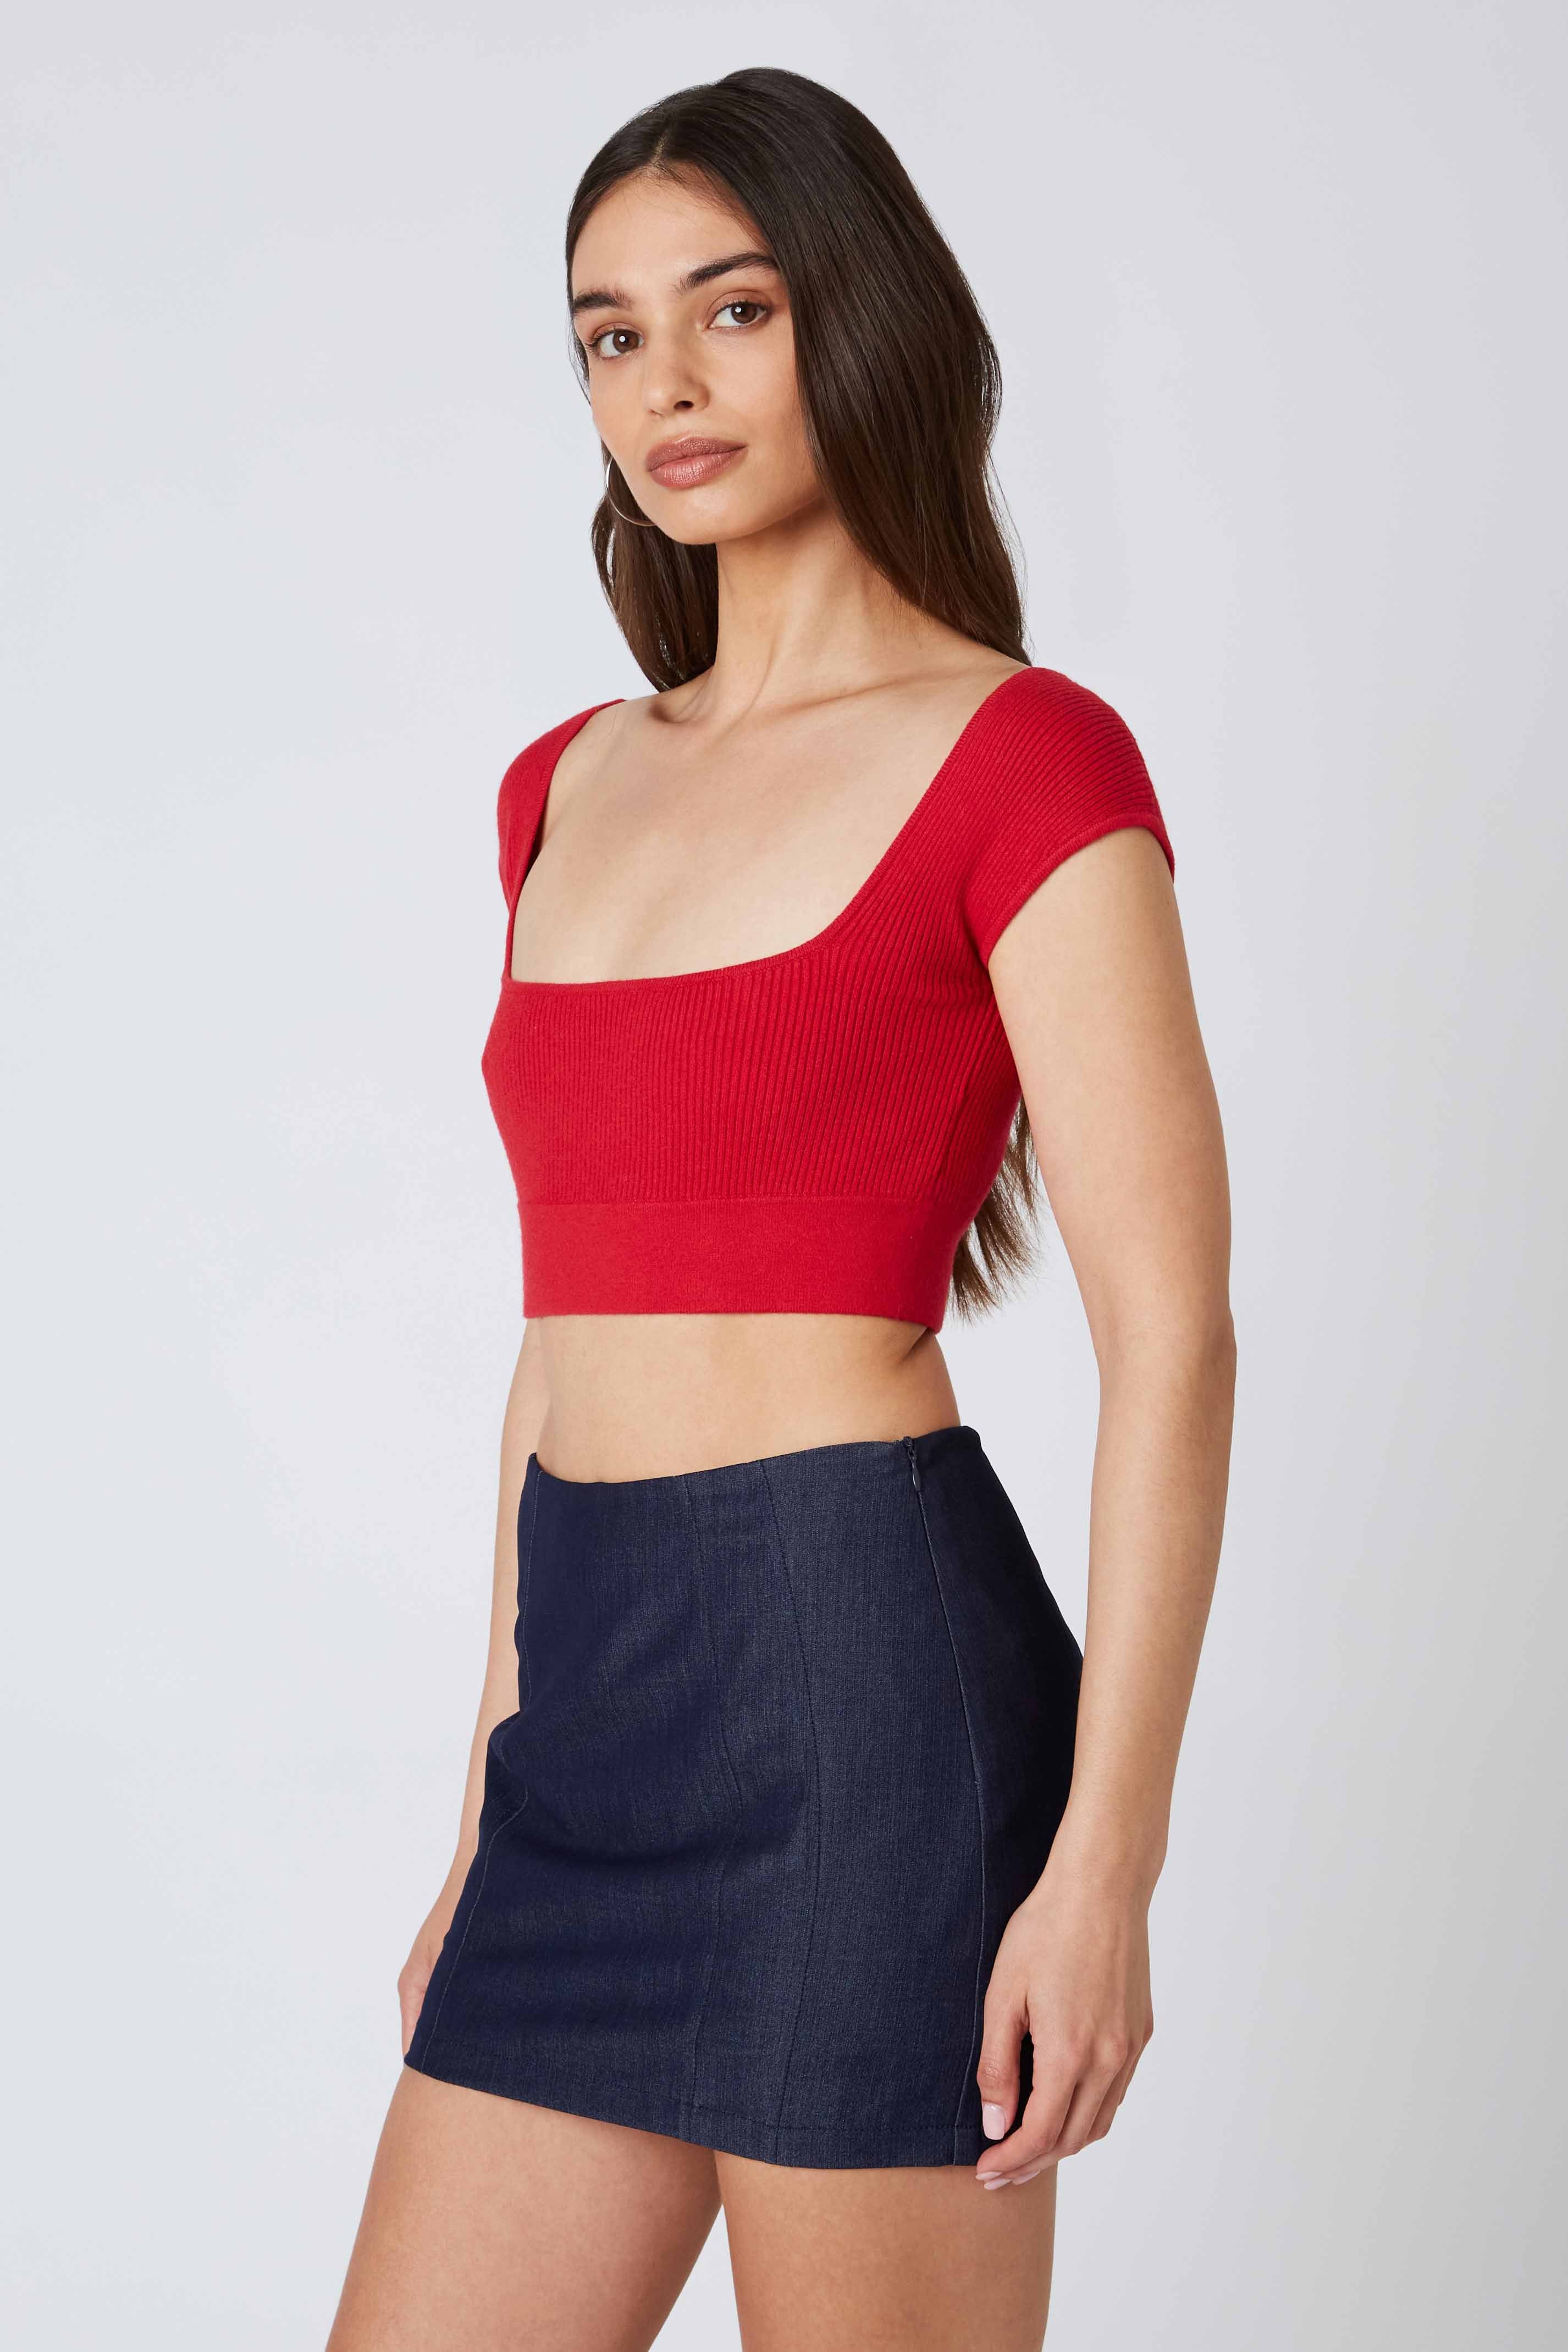 Square Neck Crop Top in Red Side View